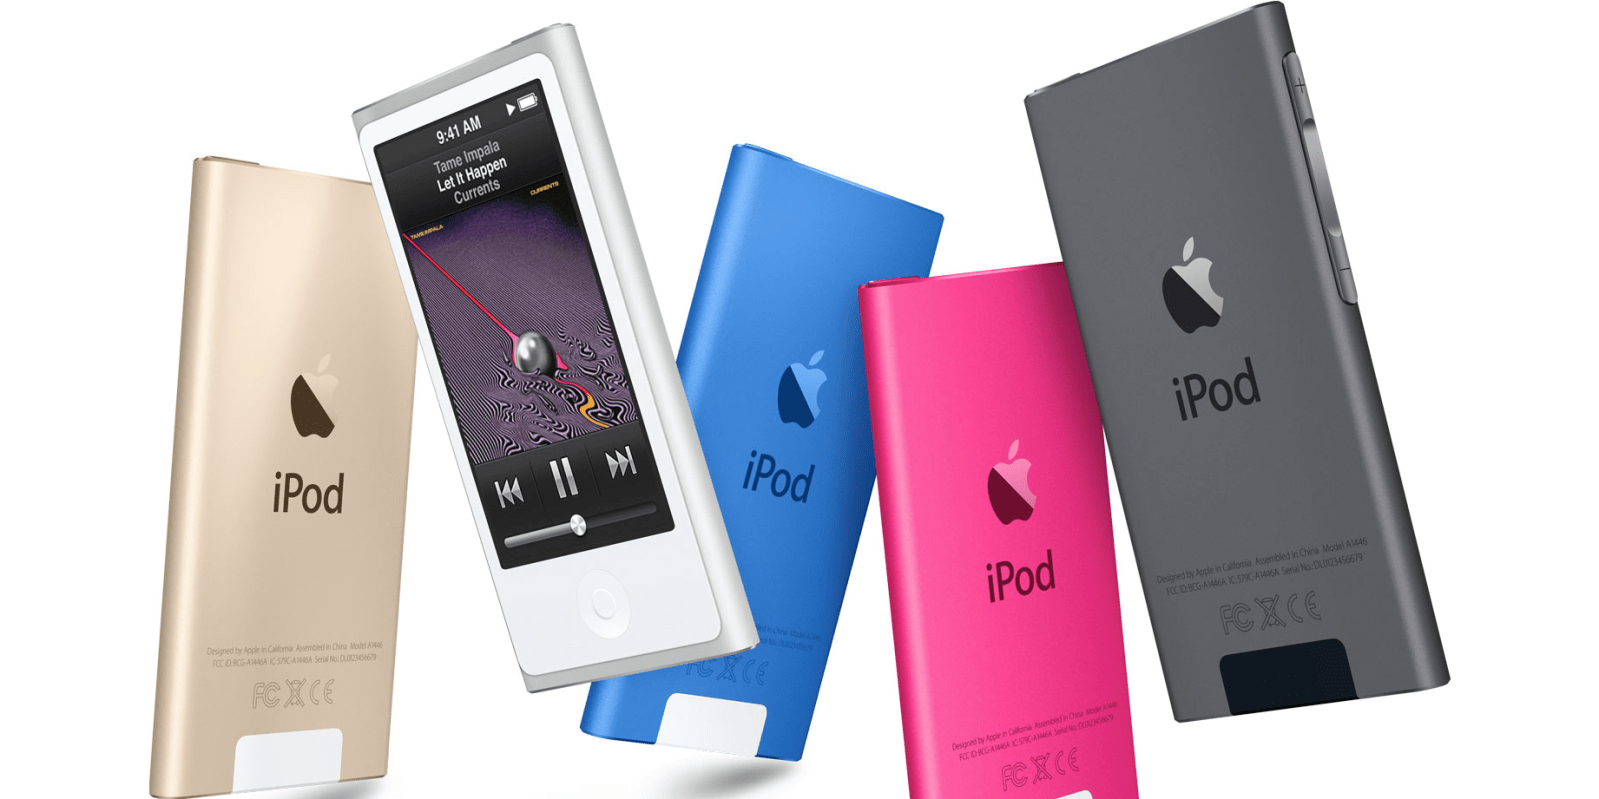 One week with the new iPod classic - Made Mistakes